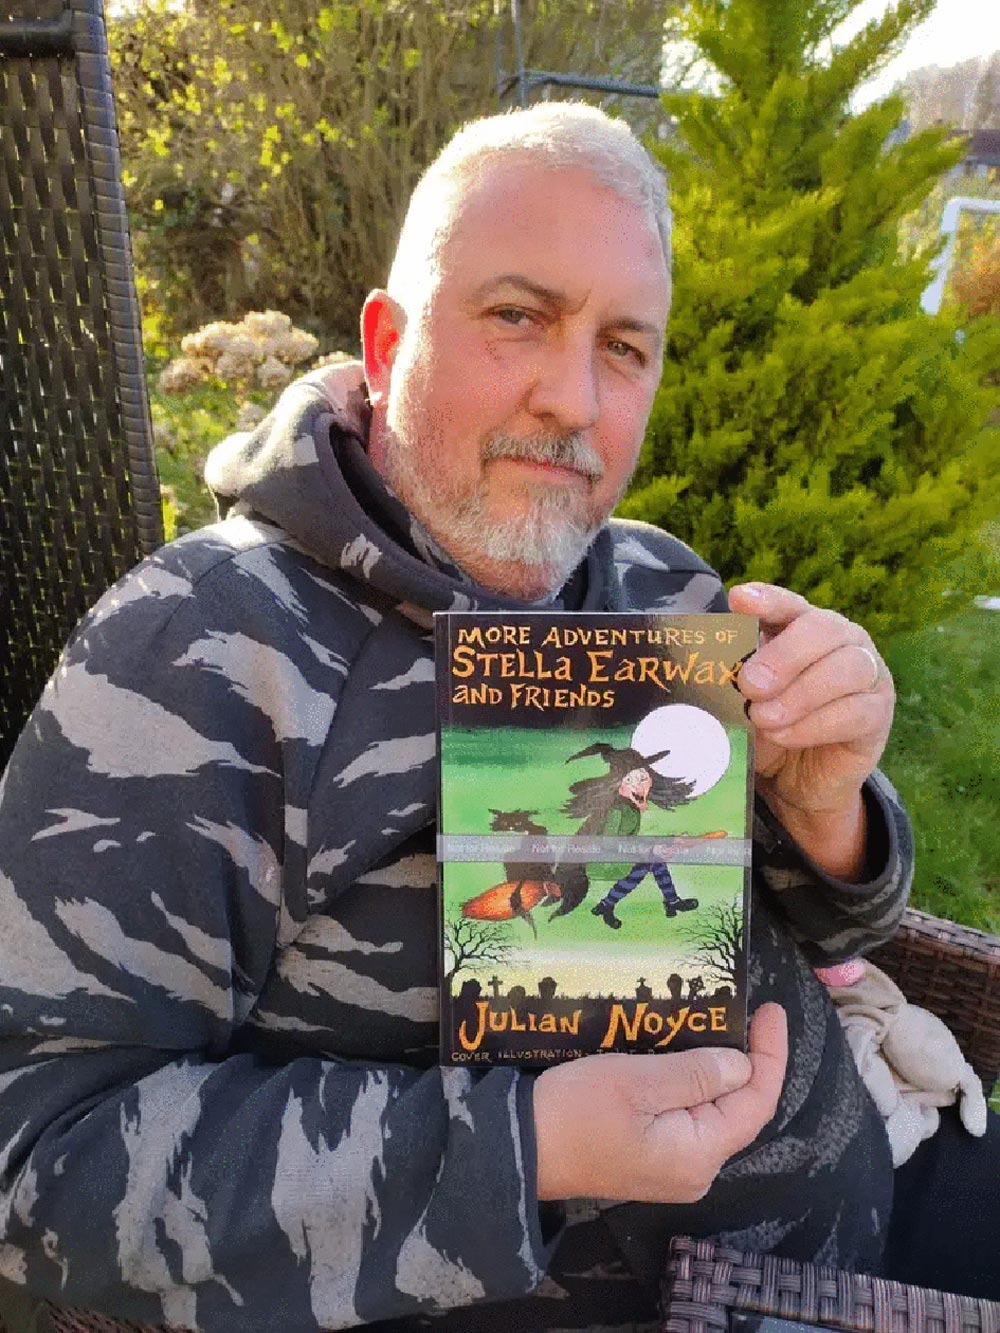 Author Julian Noyce, with a paperback copy of this book More adventures of Stella Earwax and Friends